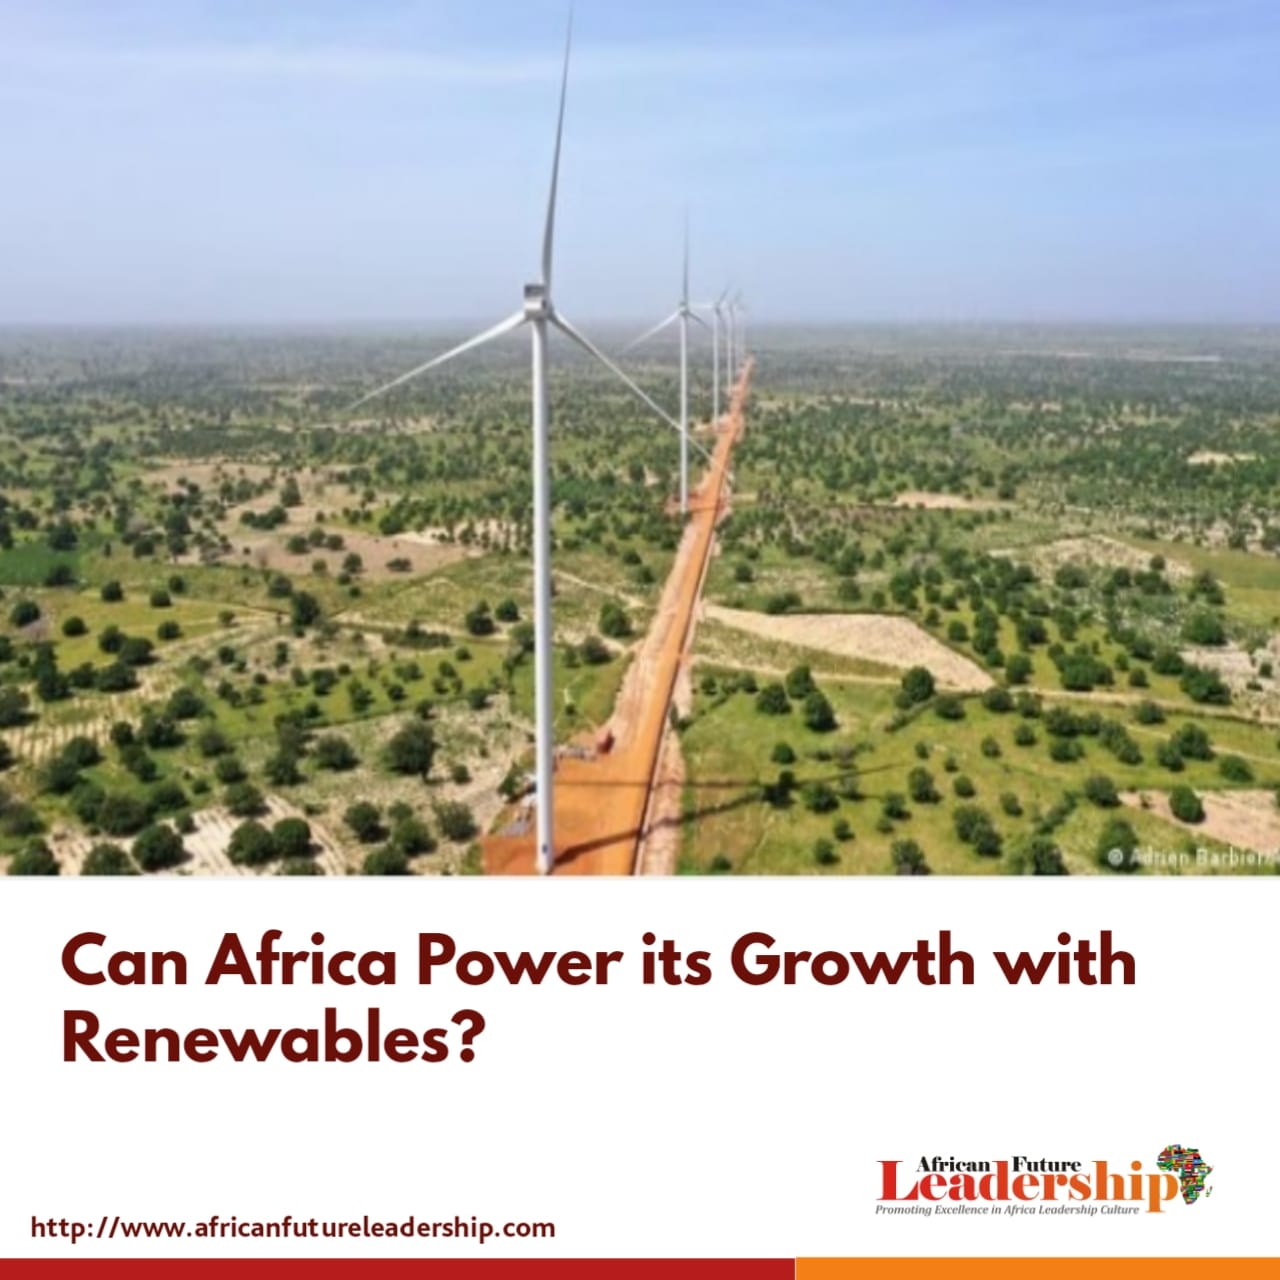 Can Africa Power its Growth with Renewables?